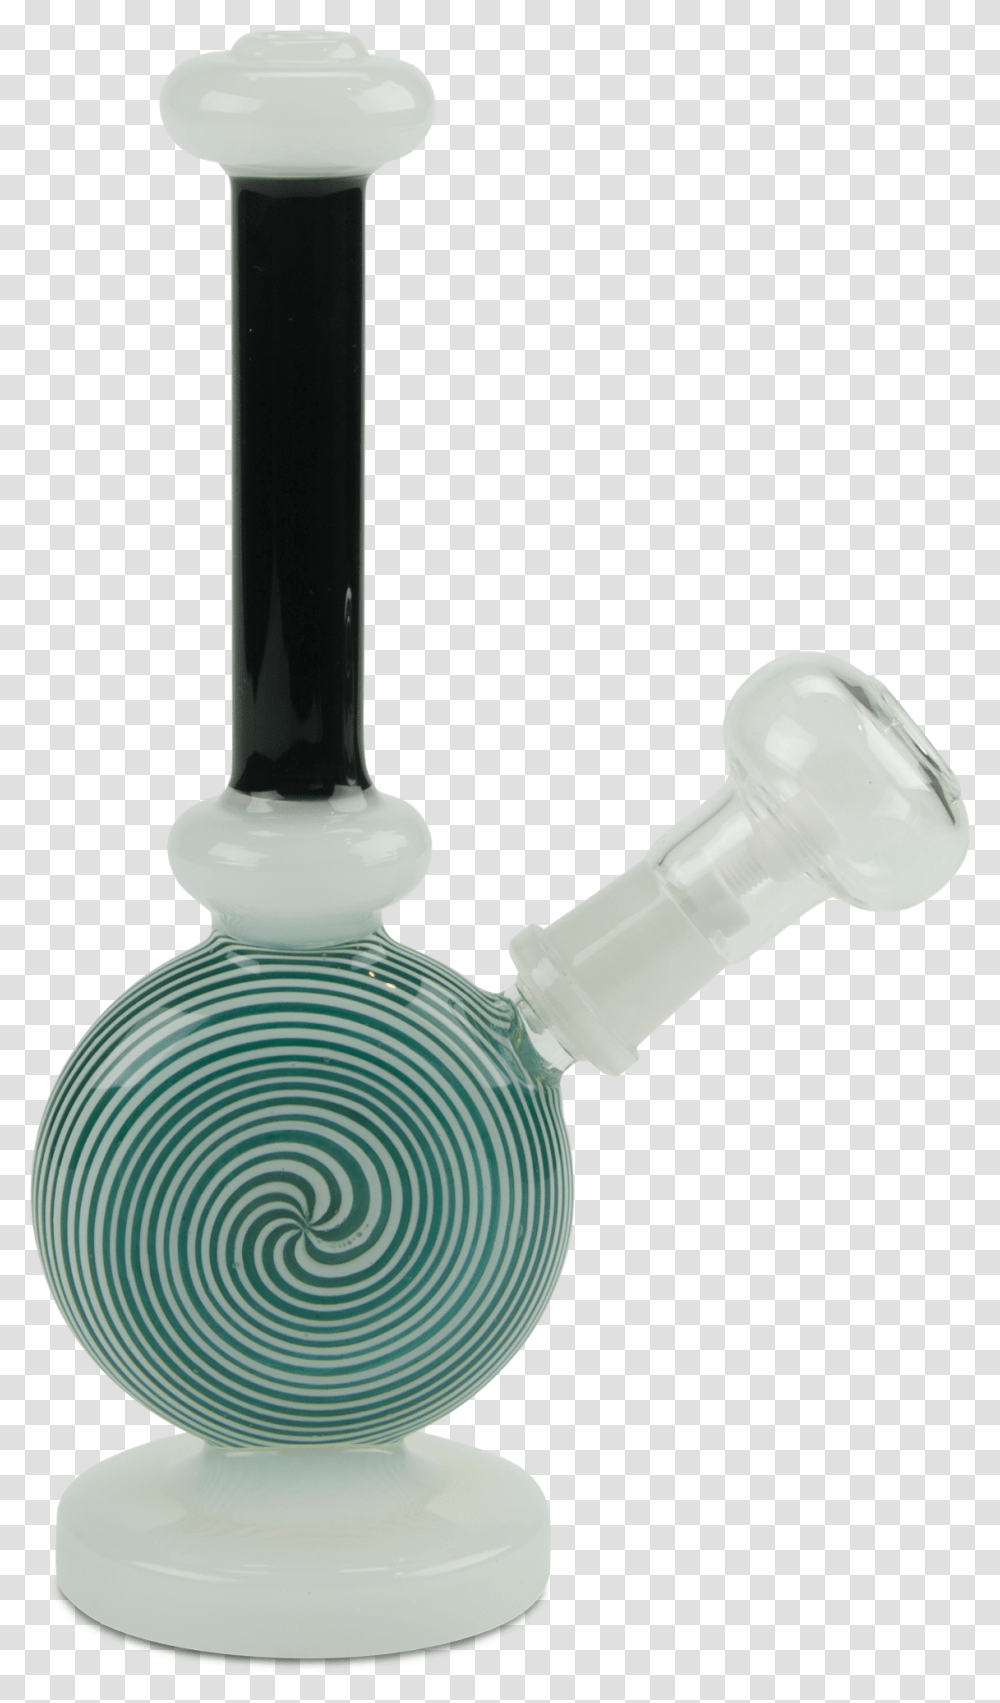 Roll Your Own Zig Zag, Lamp, Bottle, Jar, Glass Transparent Png